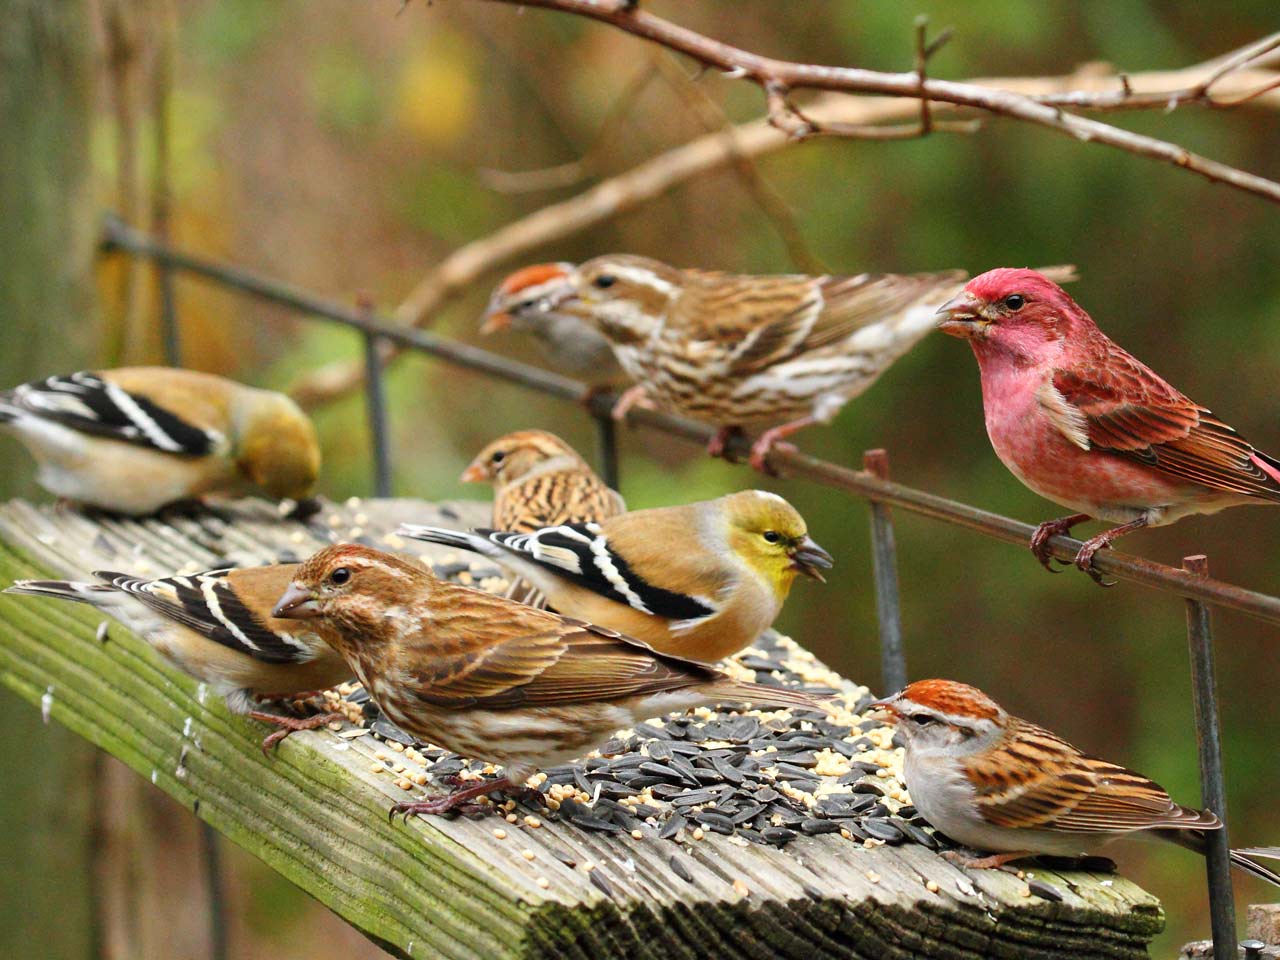 bird feeder with Chipping Sparrows, American Goldfinches, Purple Finches by Janice Carter via BirdSpotter/PFW